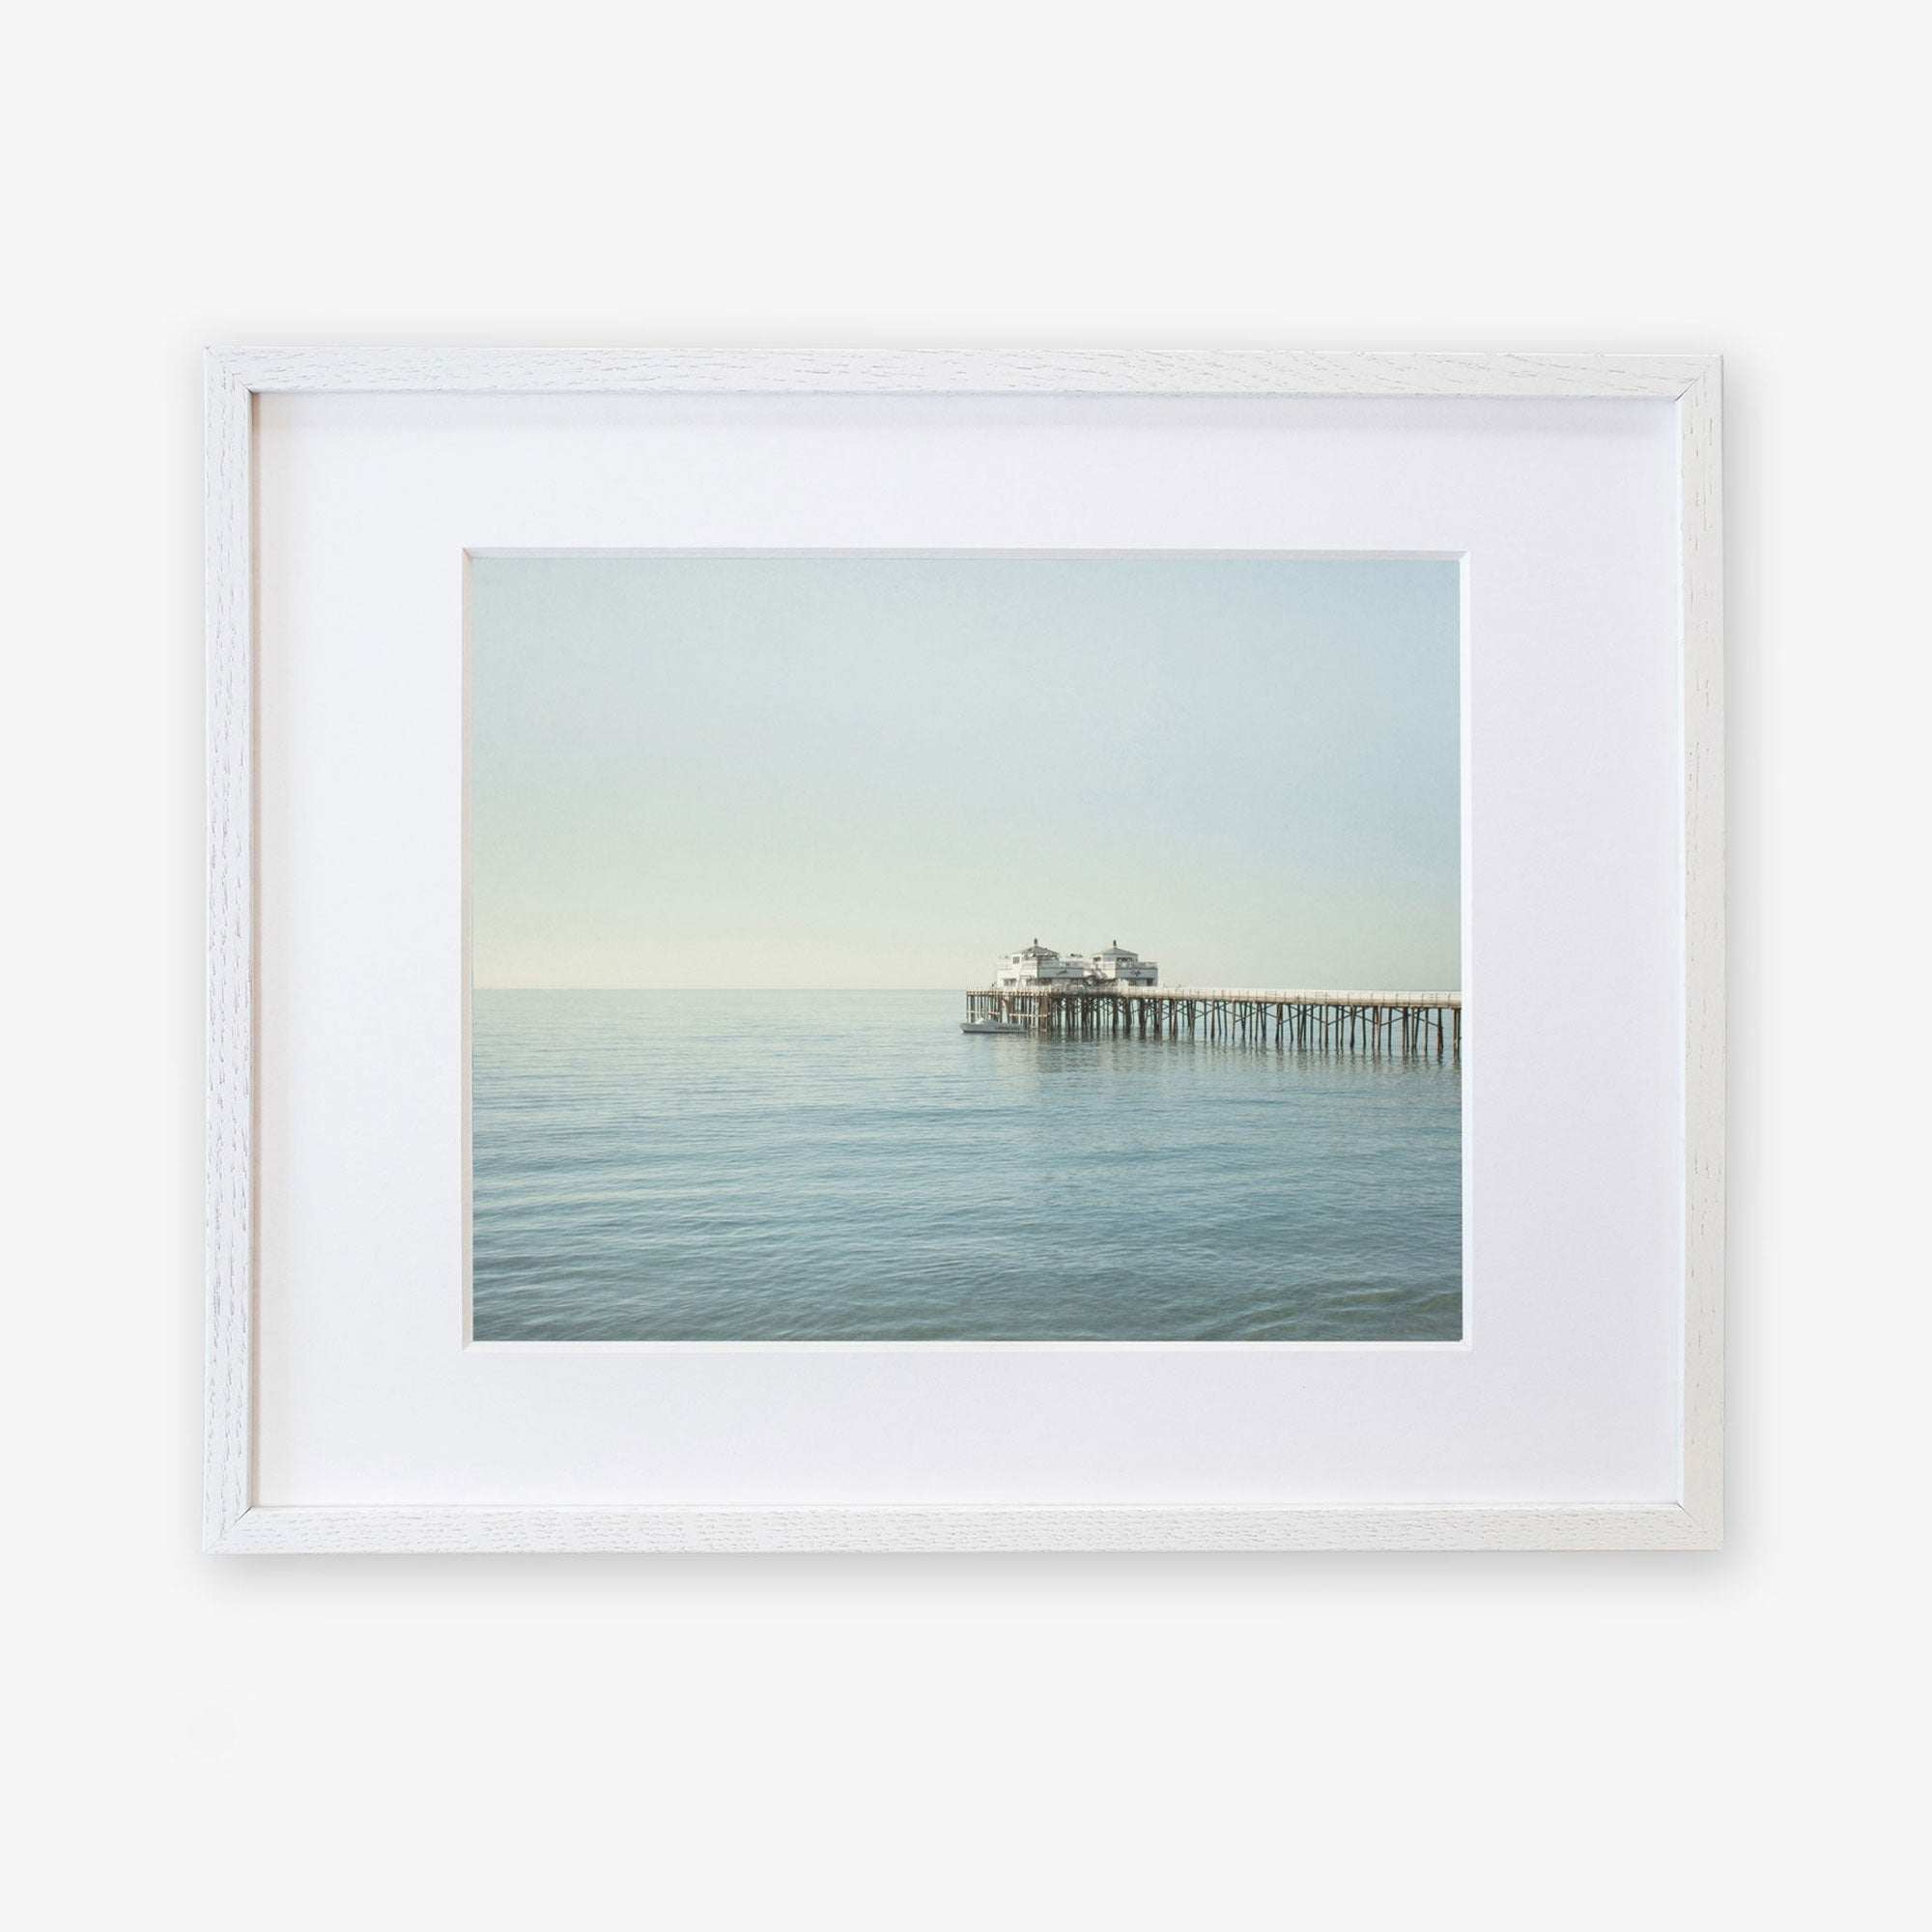 A framed photograph of a peaceful seascape with Malibu Pier extending into calm waters, displayed against a white background - Coastal Print of Malibu Pier in California &#39;All Calm in Malibu&#39; by Offley Green.